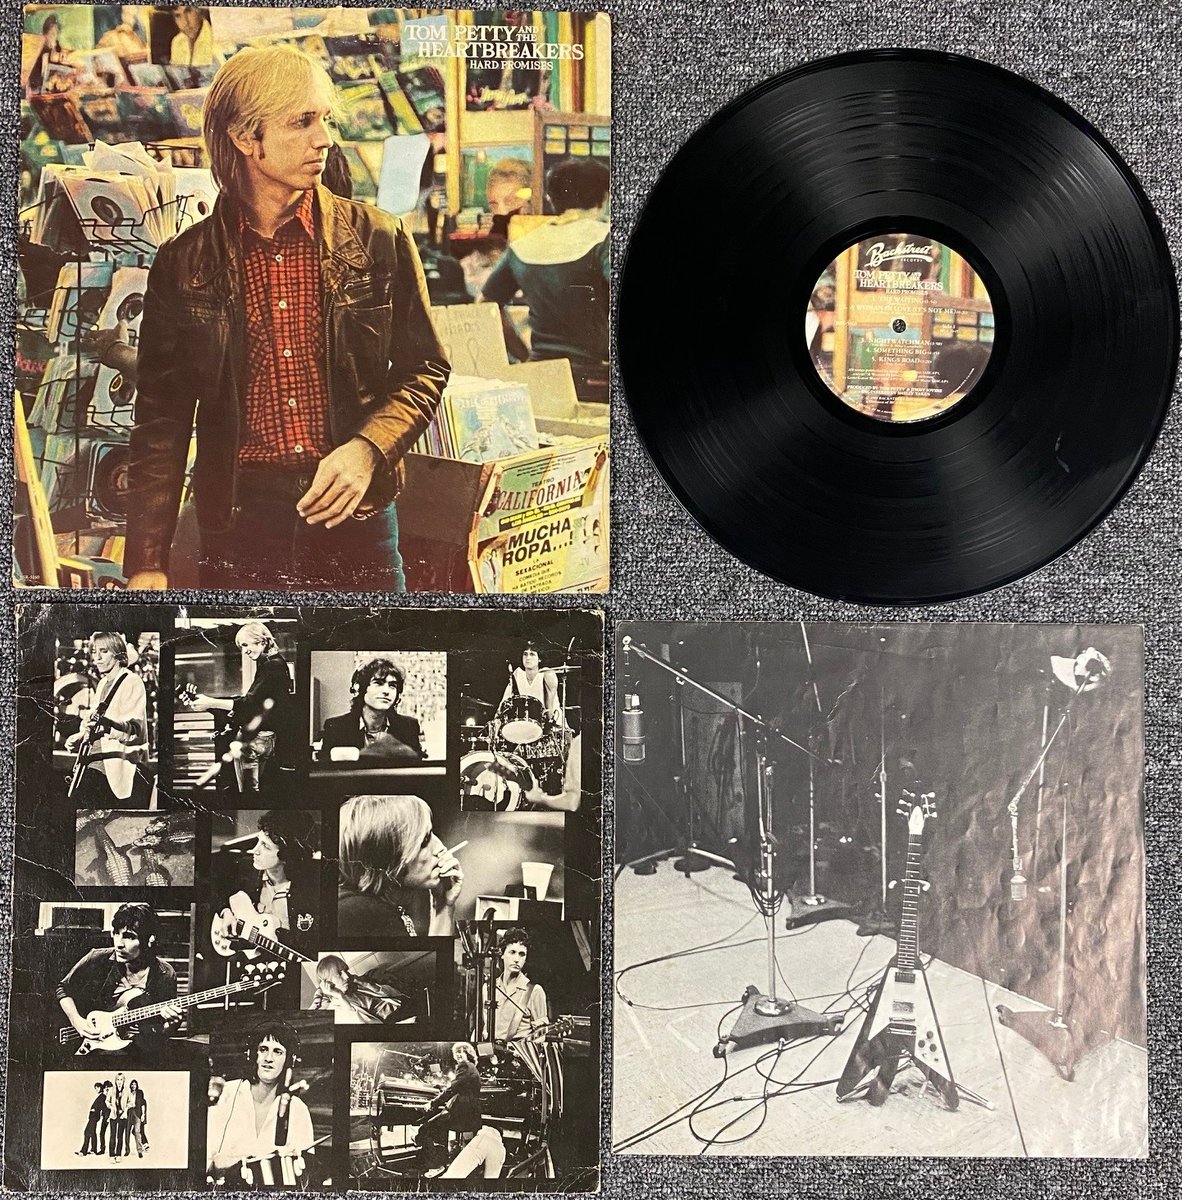 Today in 1981 @TomPetty and the Heartbreakers release their album #HardPromises What are your top 5 #TomPetty songs? - @JoeRockWMMO #Rock #ClassicRock #TomPettyAndTheHeartbreakers #Vinyl #RockOnRock #TodayInRock #989WMMO